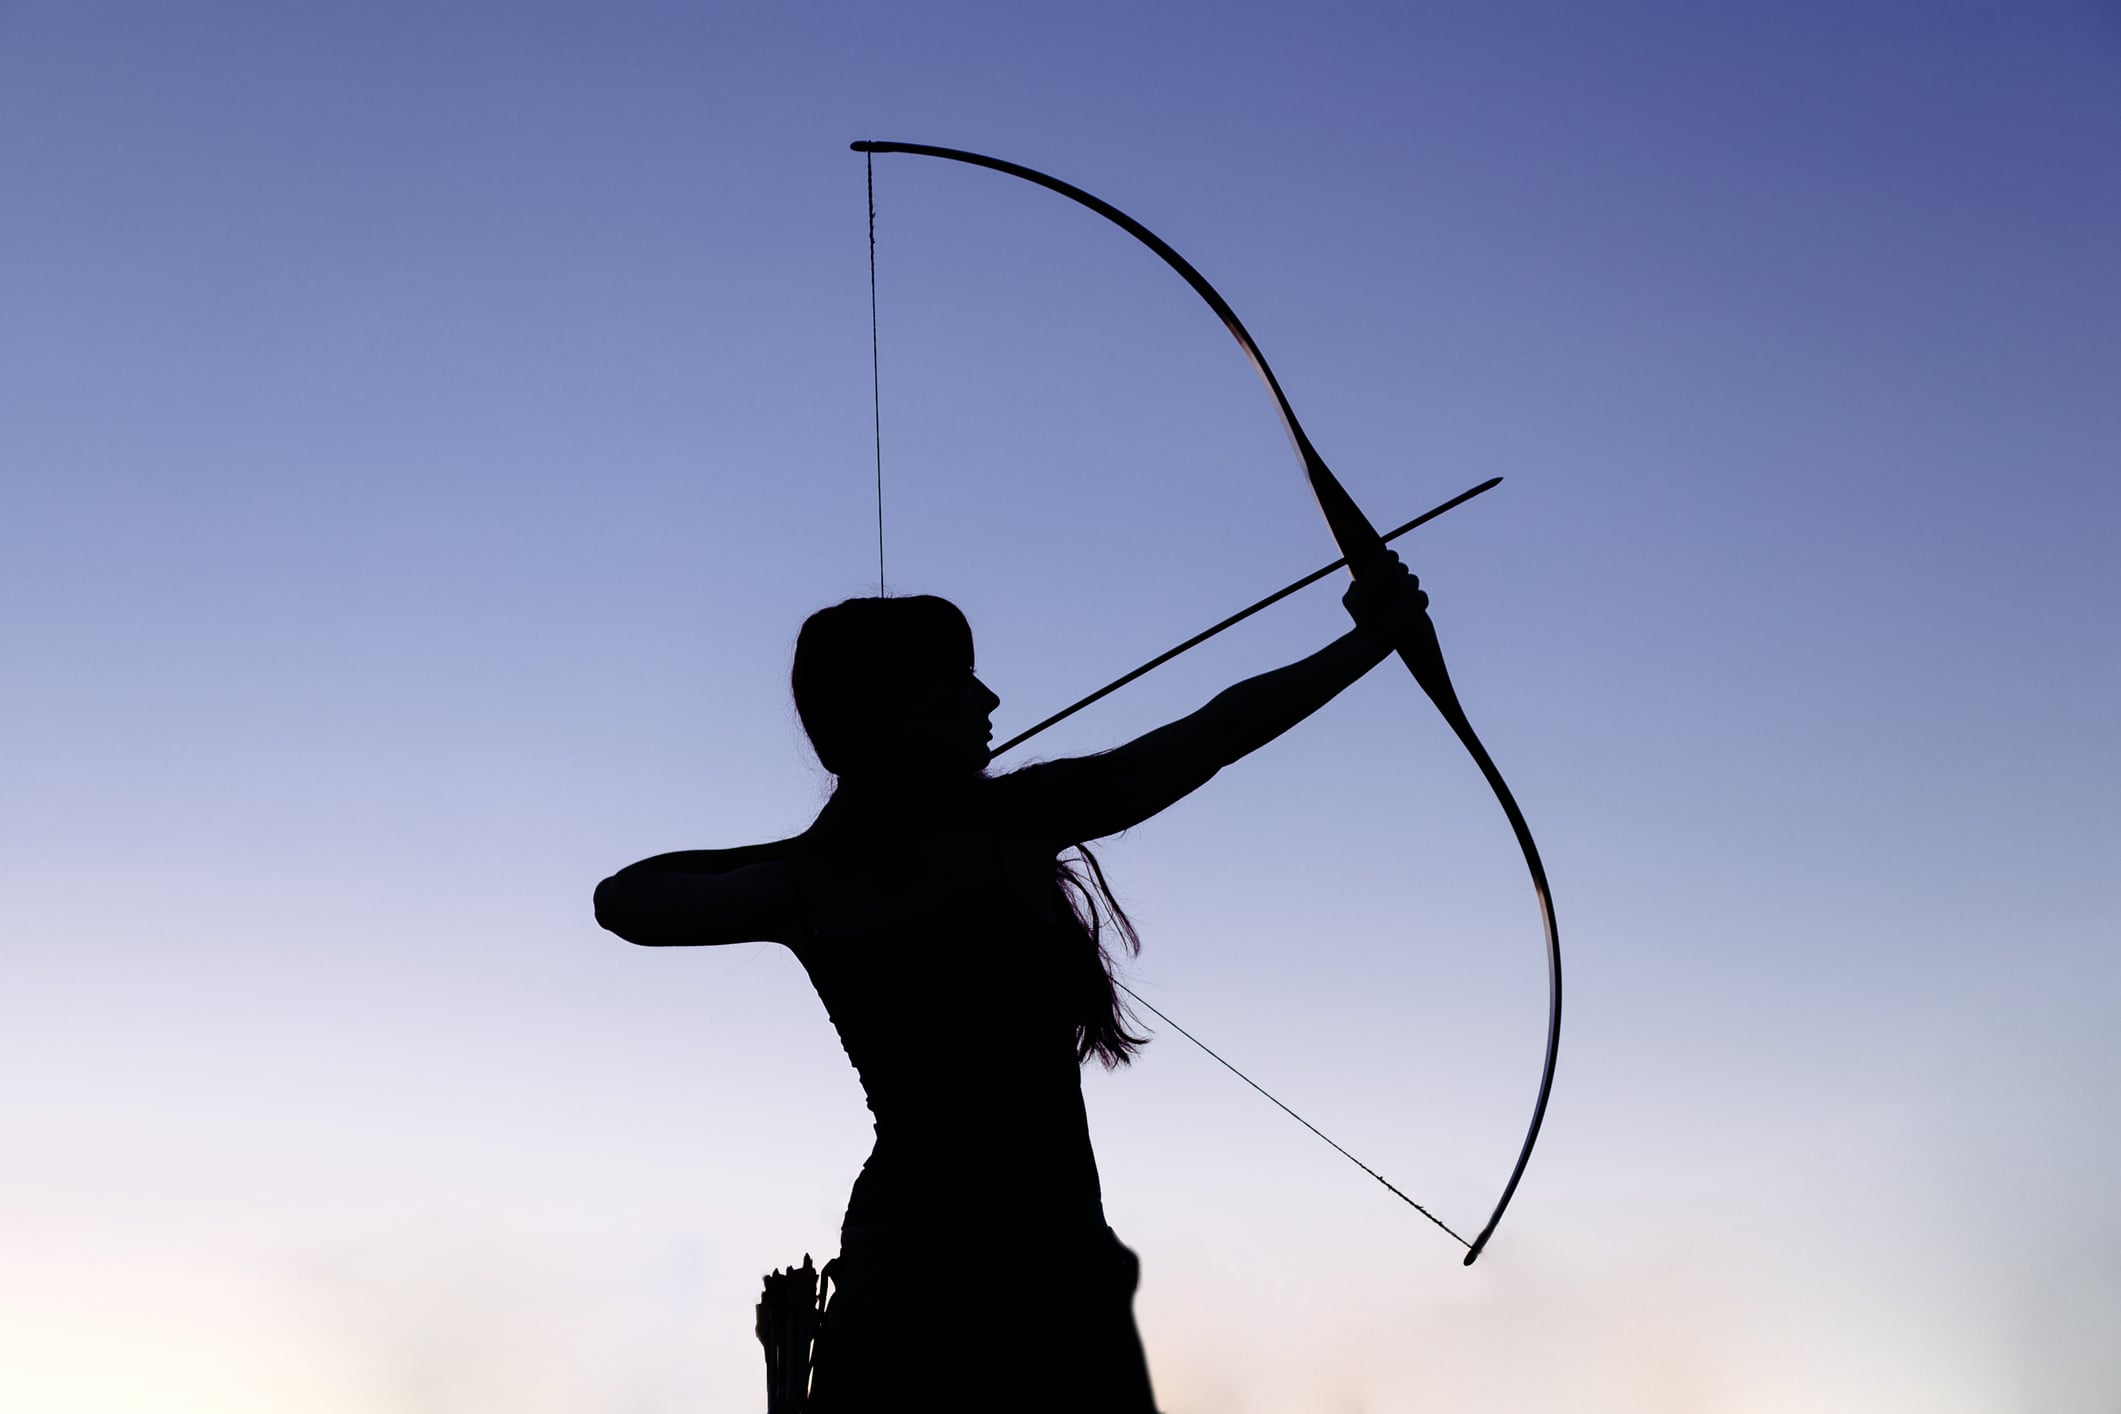 Female ginger hair archer shooting targets with her bow and arrow. Concentration, target, success concept